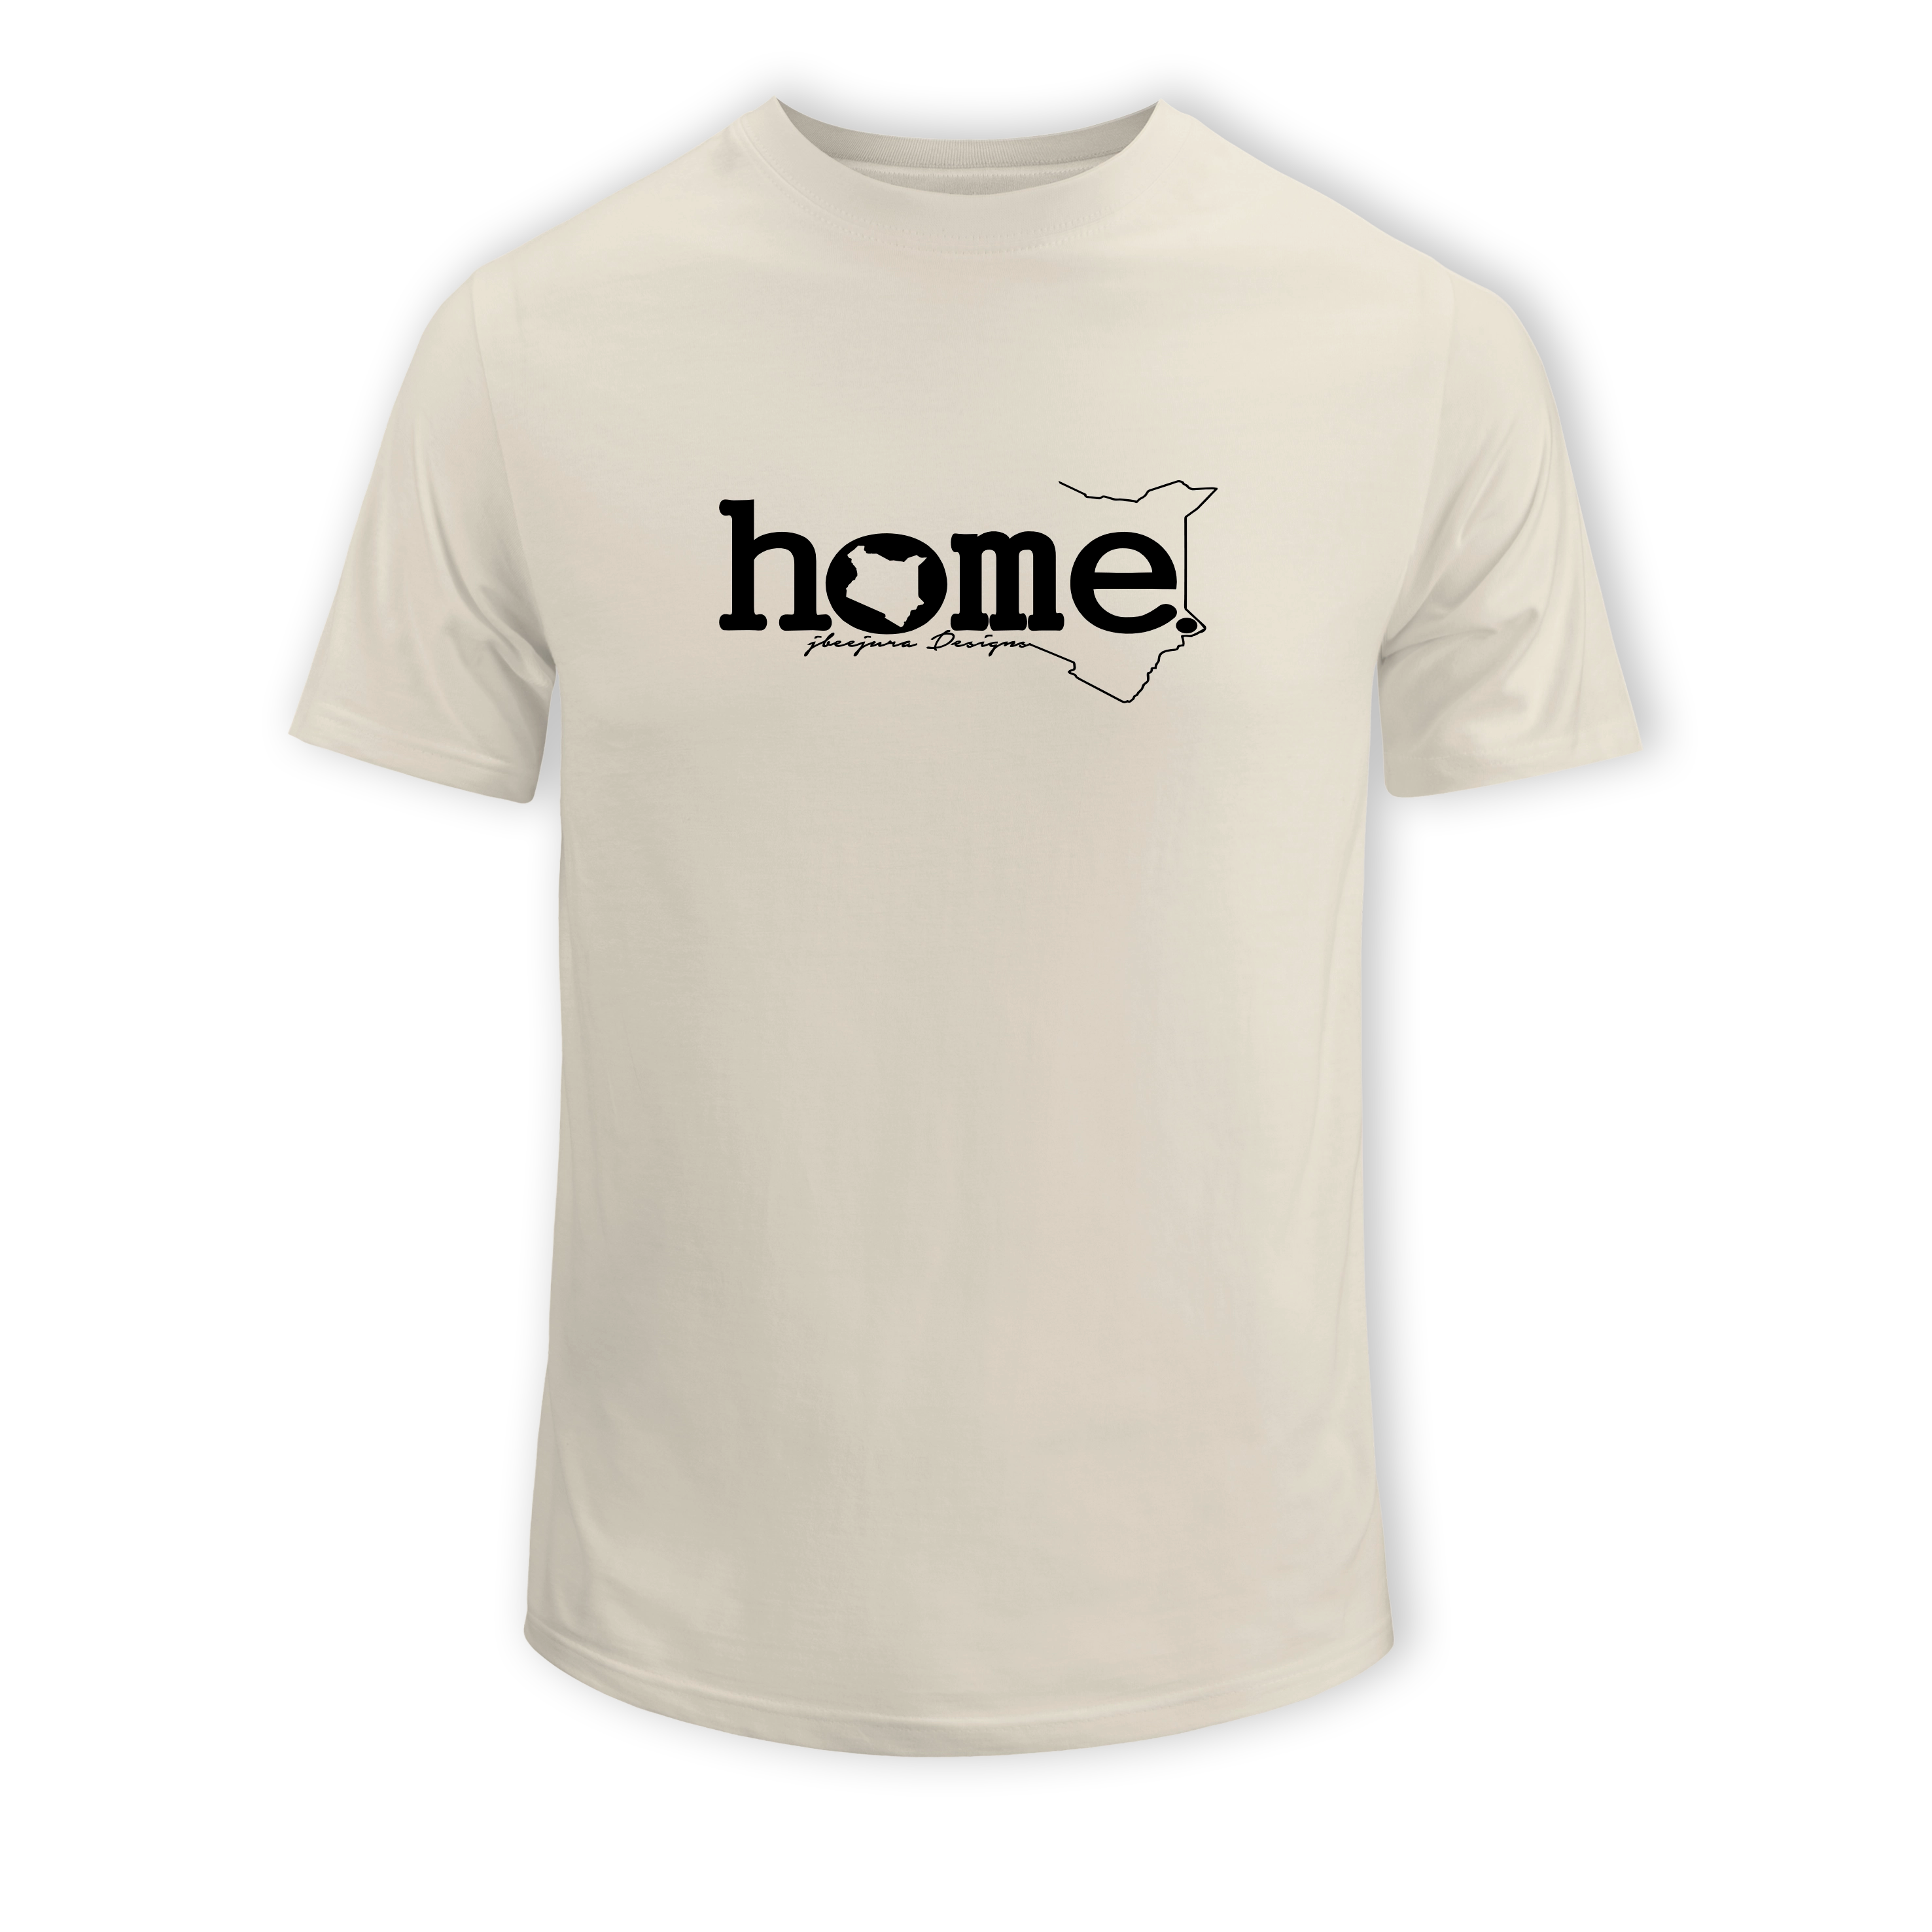 home_254 SHORT-SLEEVED NUDE T-SHIRT WITH A BLACK CLASSIC WORDS PRINT – COTTON PLUS FABRIC